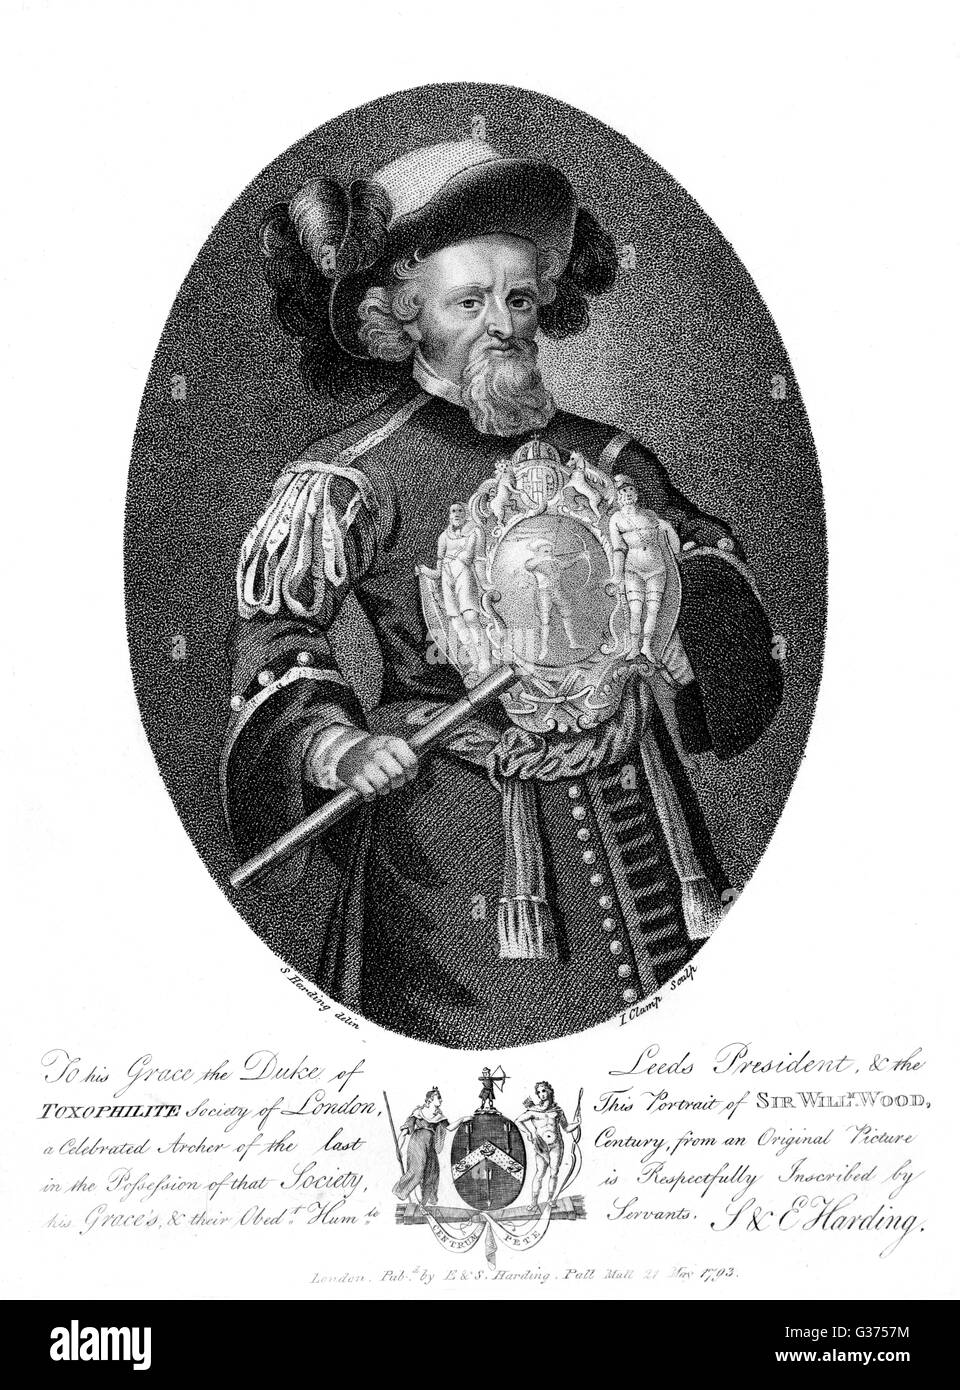 SIR WILLIAM WOOD dressed as  marshal of the Finsbury  Archers, author.        Date: 1609 - 1691 Stock Photo